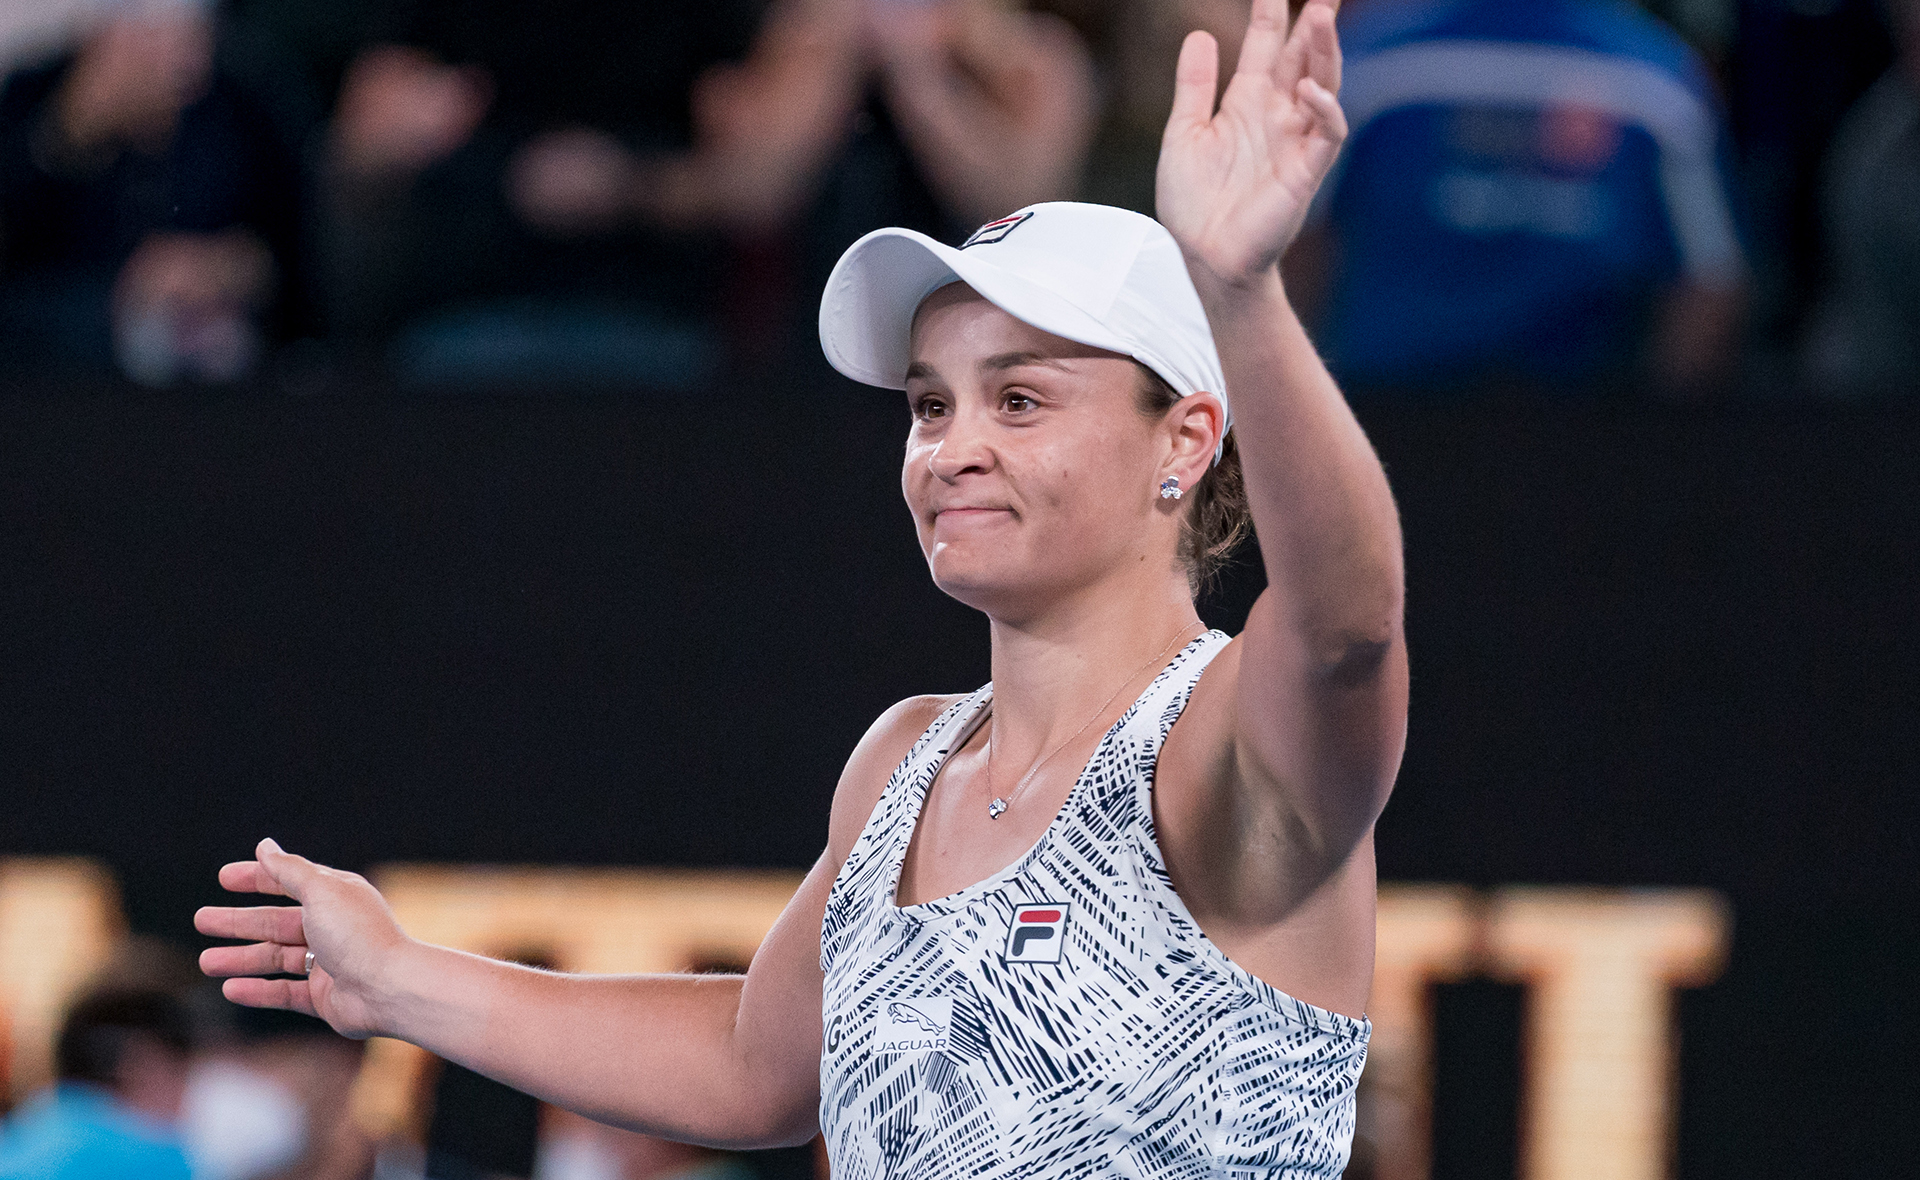 Ash Barty announces shock retirement from tennis: “Physically I have nothing more to give”